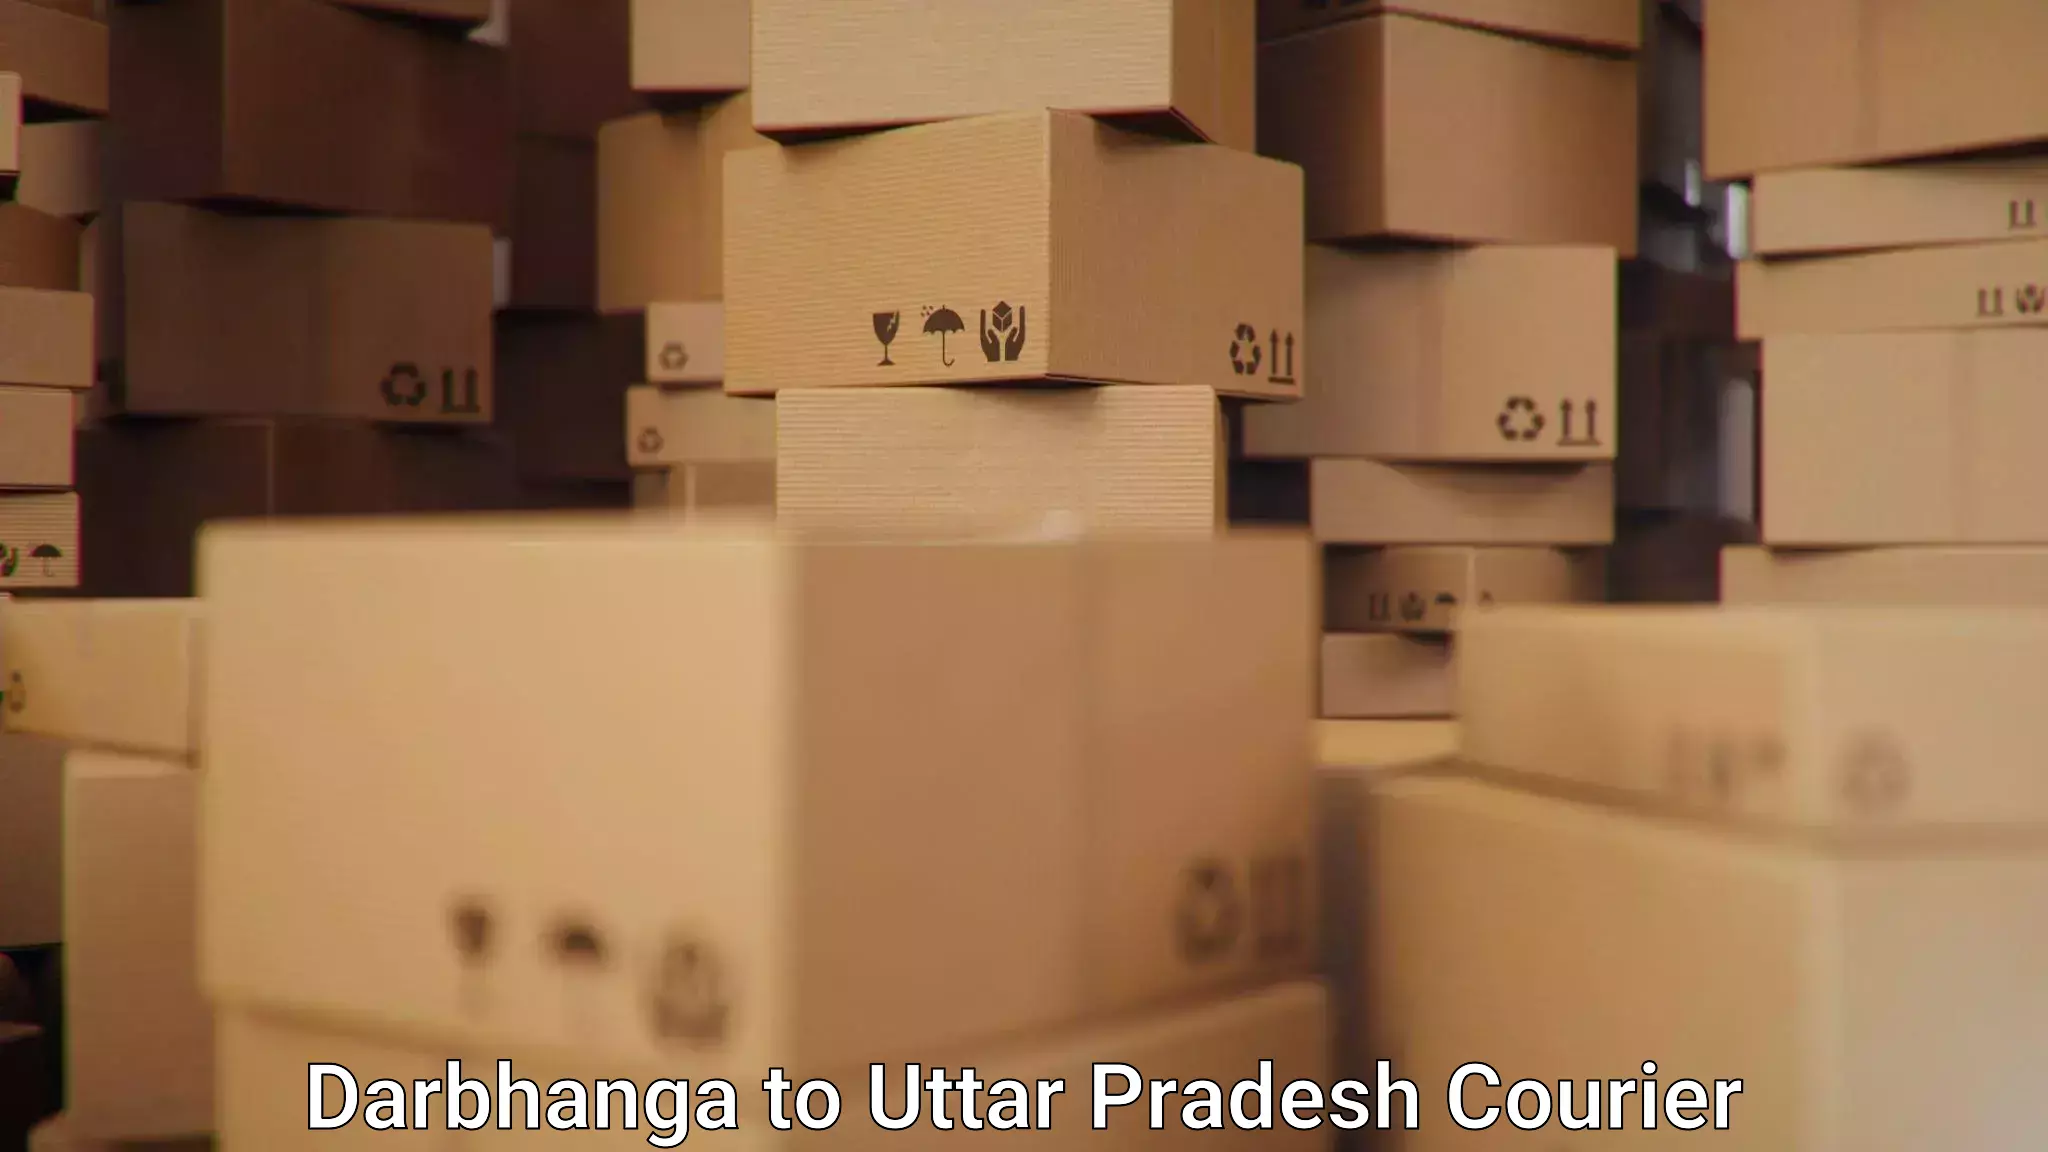 24-hour courier services Darbhanga to Vrindavan